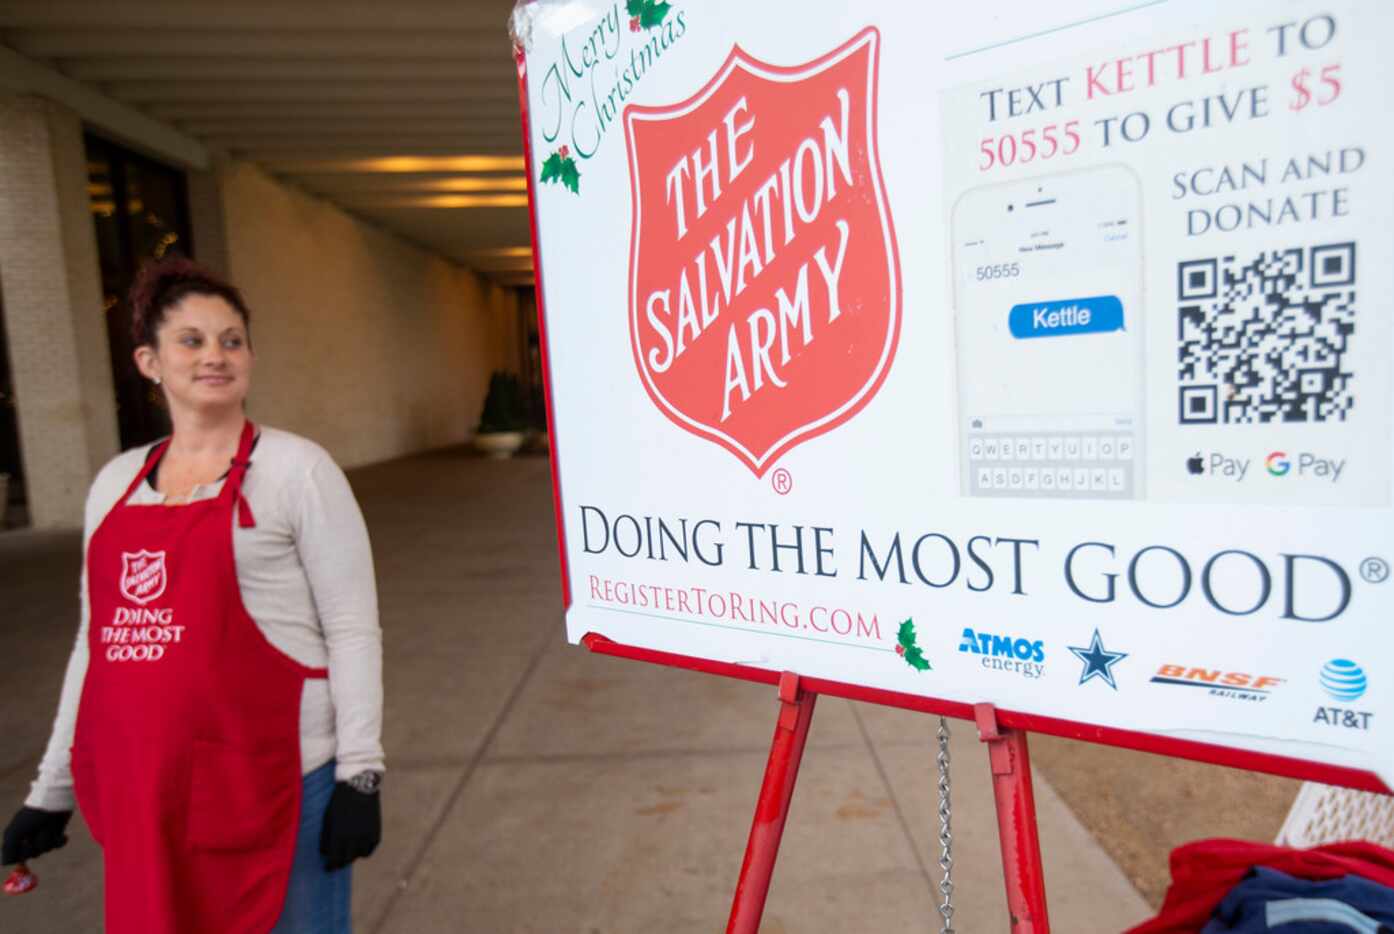 Casey Odu Onikosi rings the Salvation Army bell at NorthPark Center in Dallas.